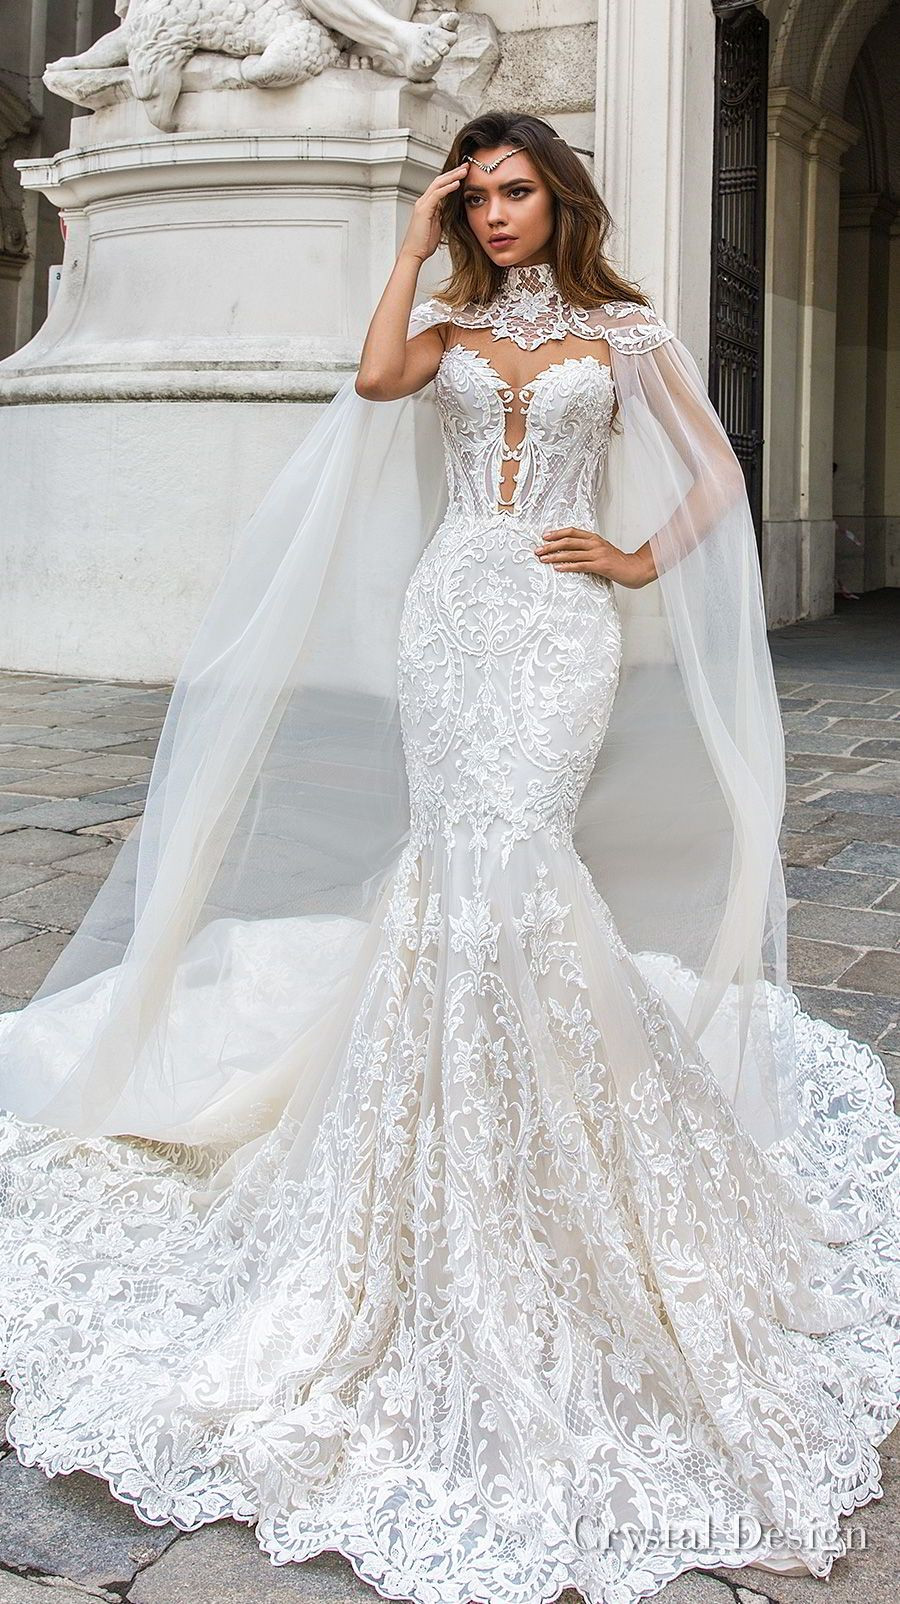 Most Expensive Wedding Gowns
 Most Expensive Wedding Gowns 2018 Crystal Design 2018